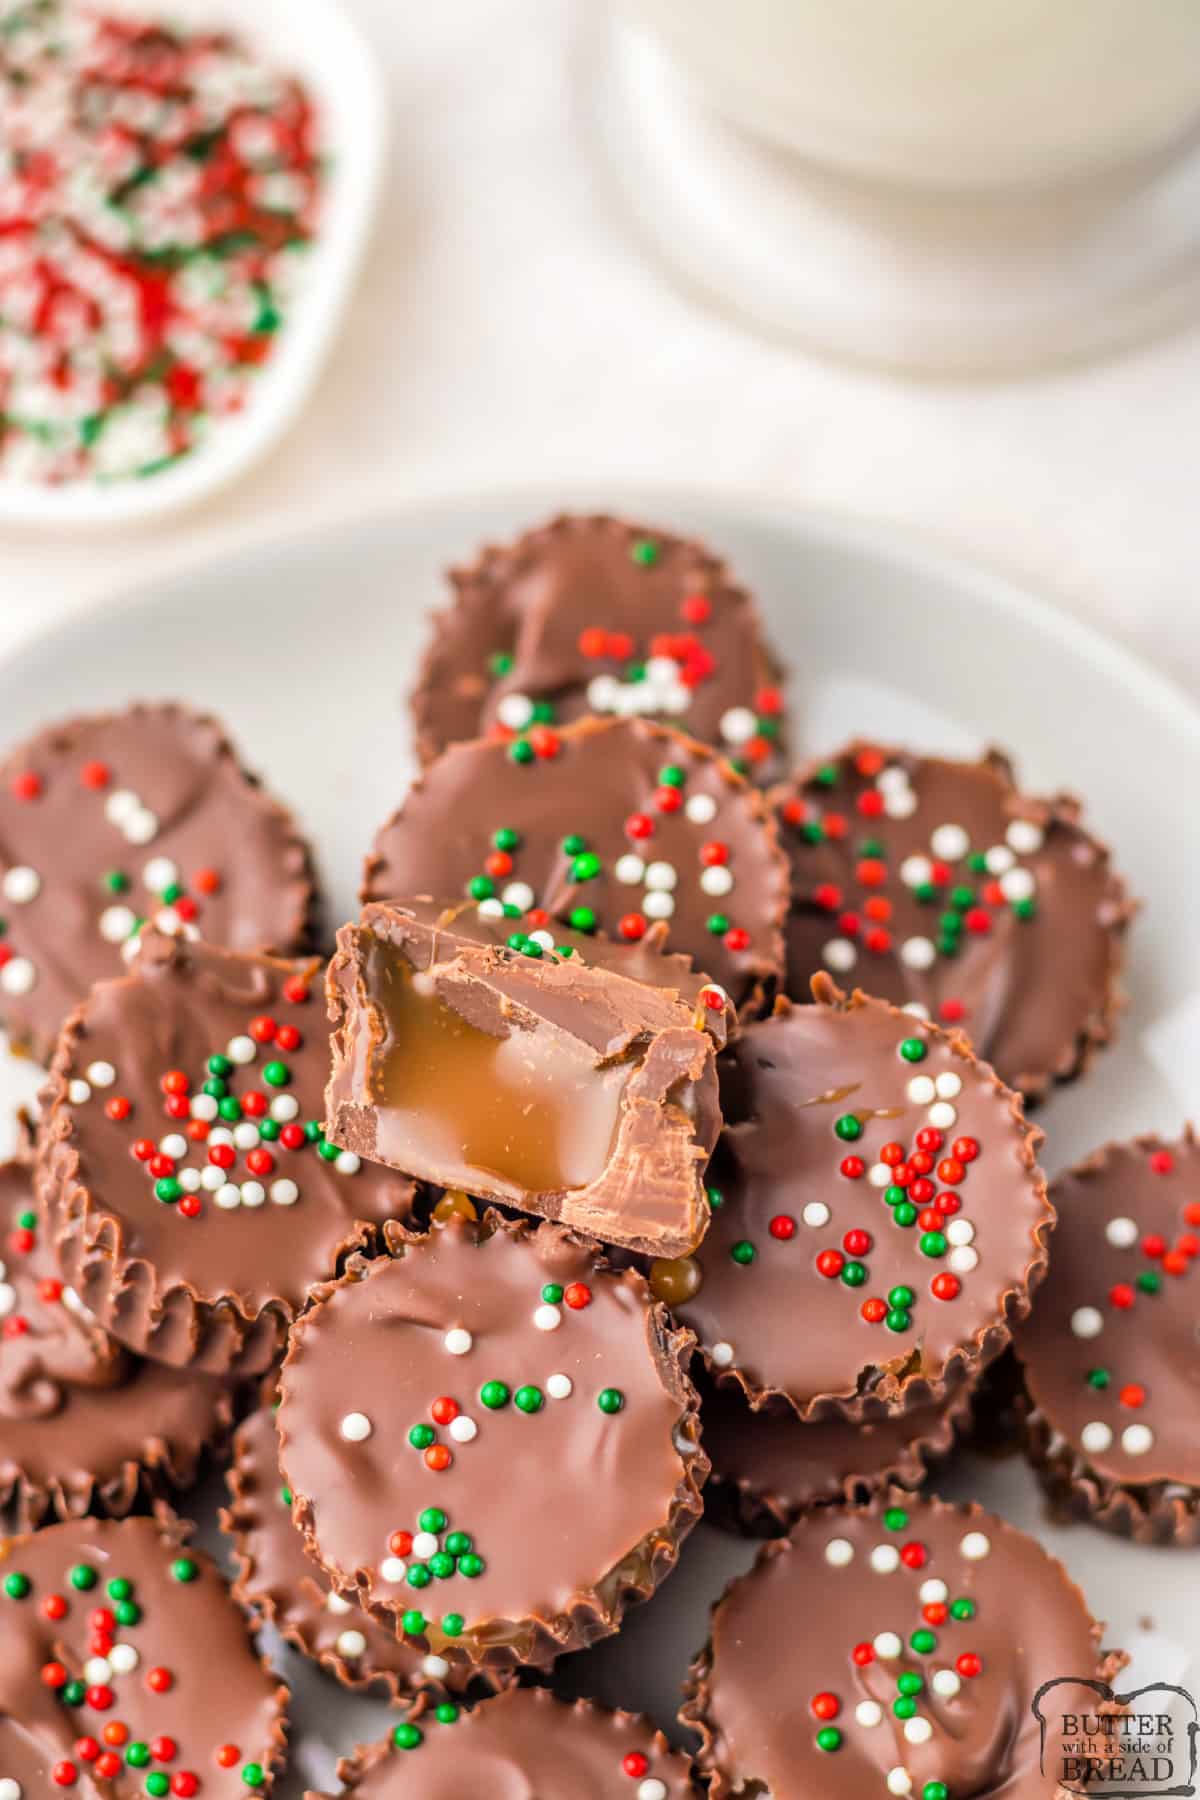 CHRISTMAS CHOCOLATE CARAMEL CUPS - Butter with a Side of Bread